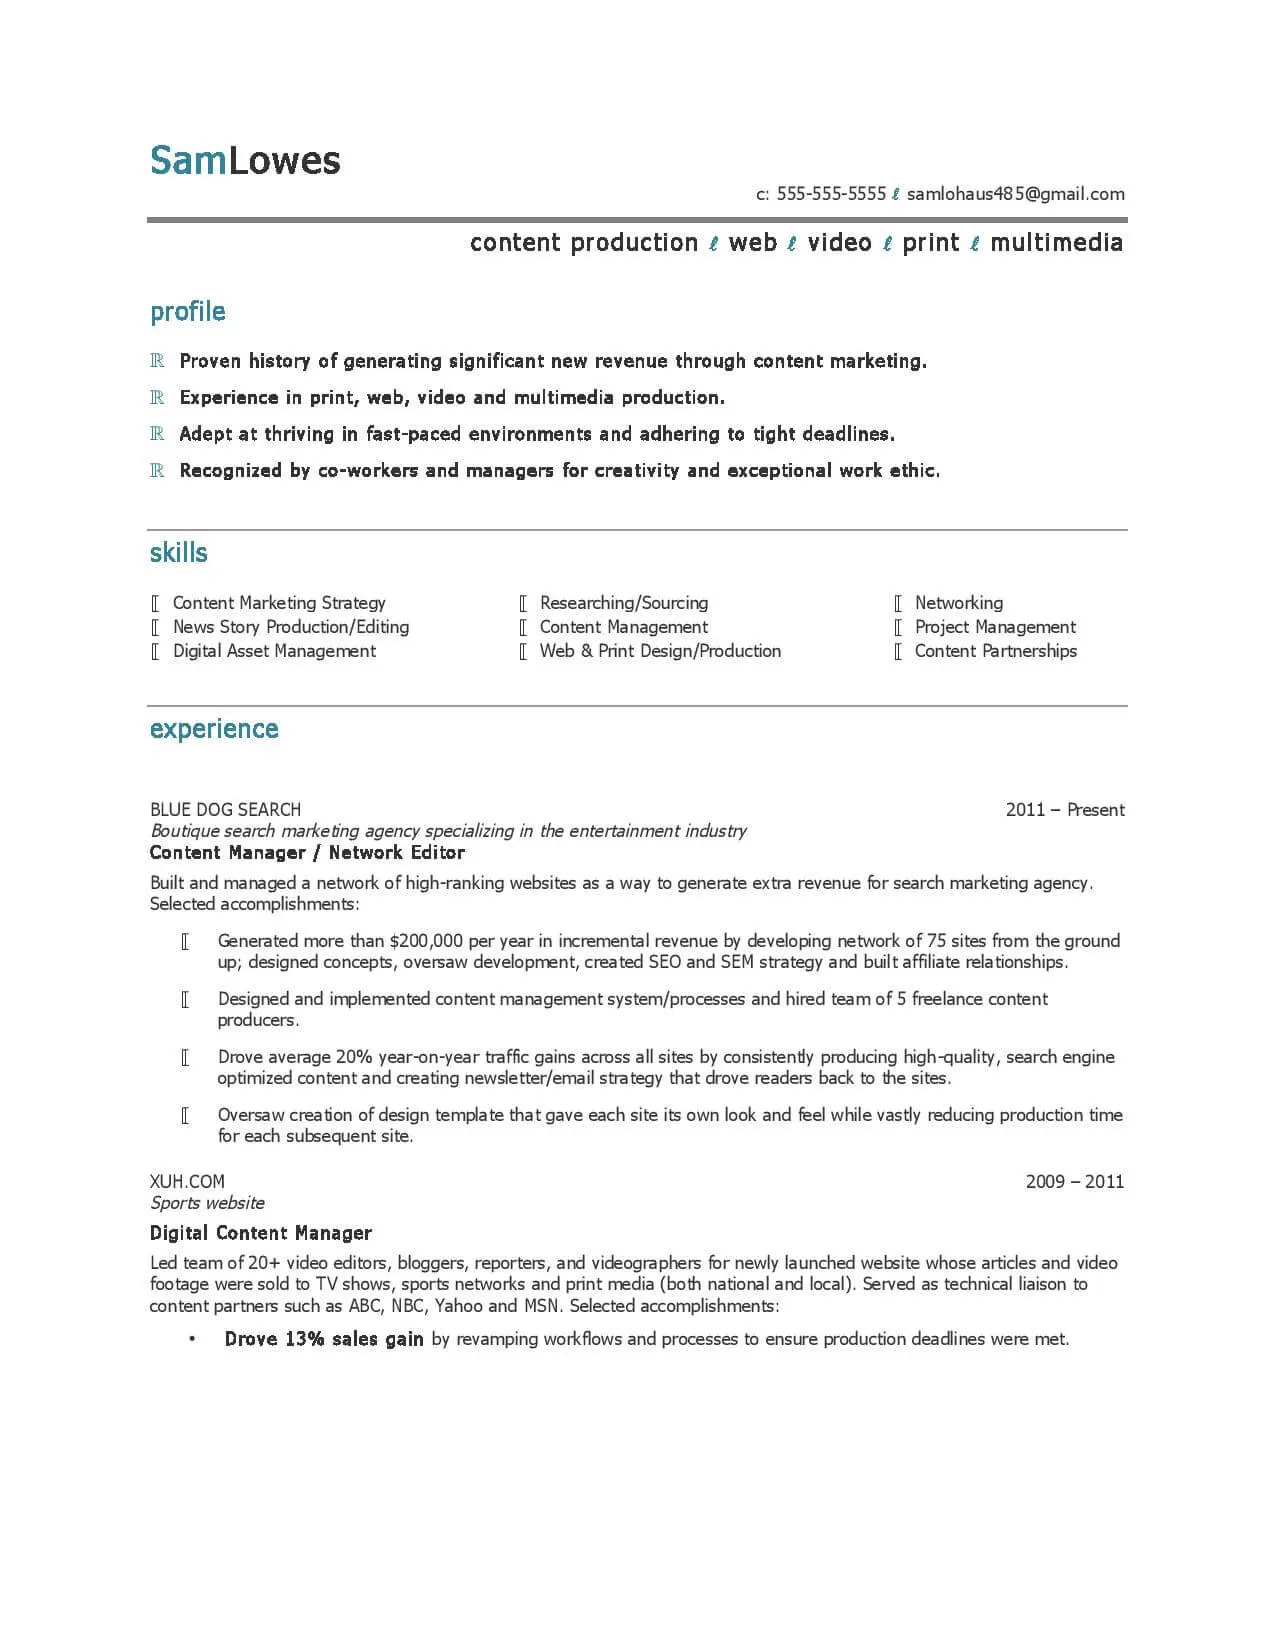 Content Production Specialist resume sample